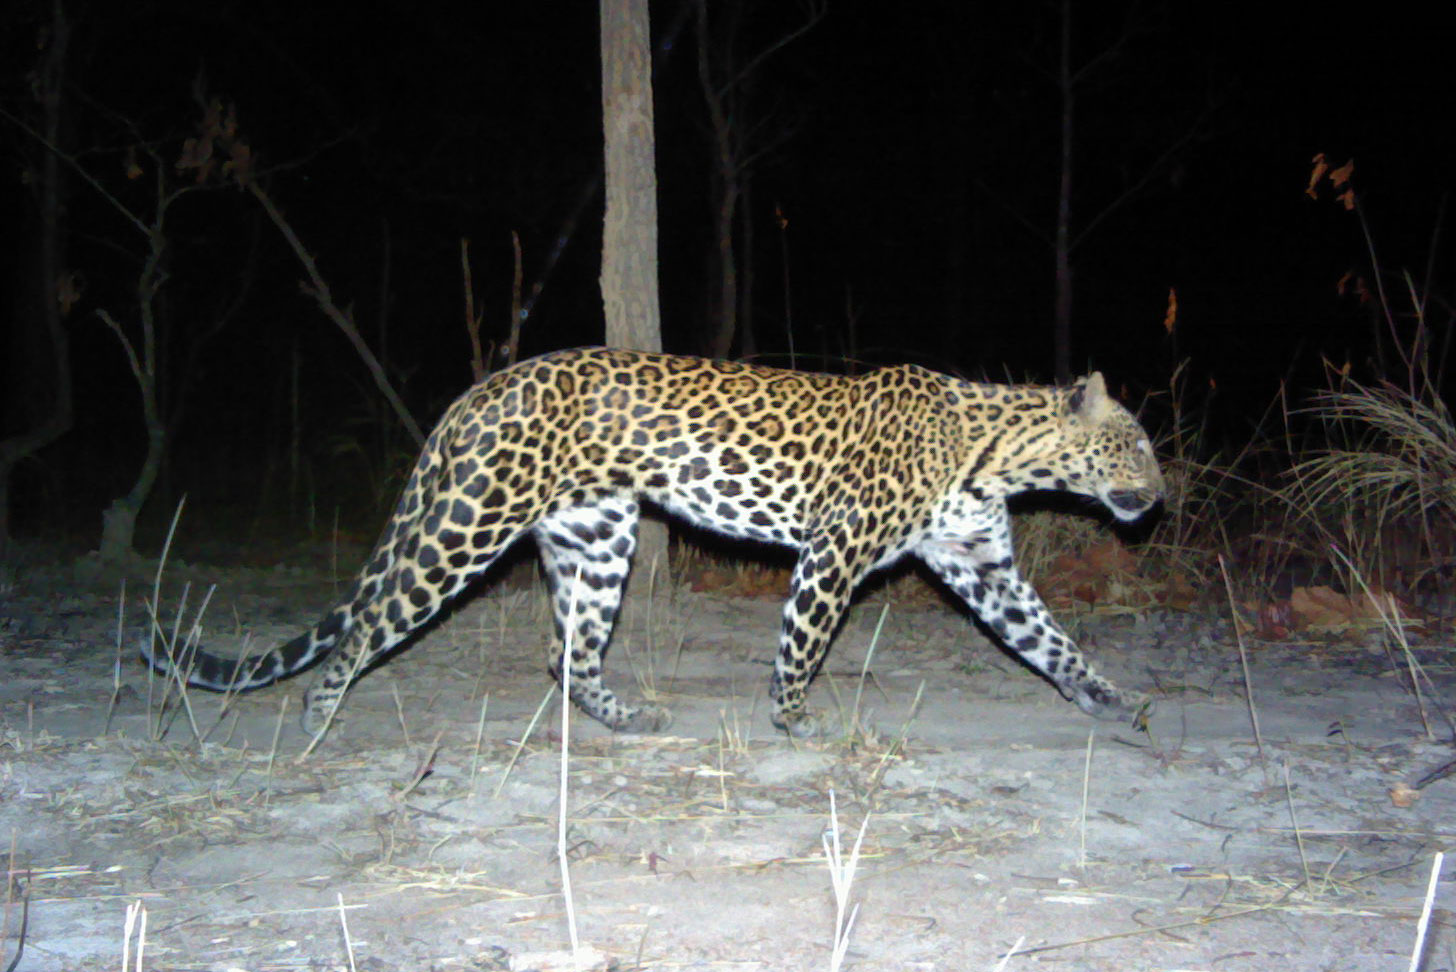 Leopard 1: Male Indochinese leopard from eastern Cambodia. Photo courtesy of Panthera, WWF Cambodia, and Forestry Administration.